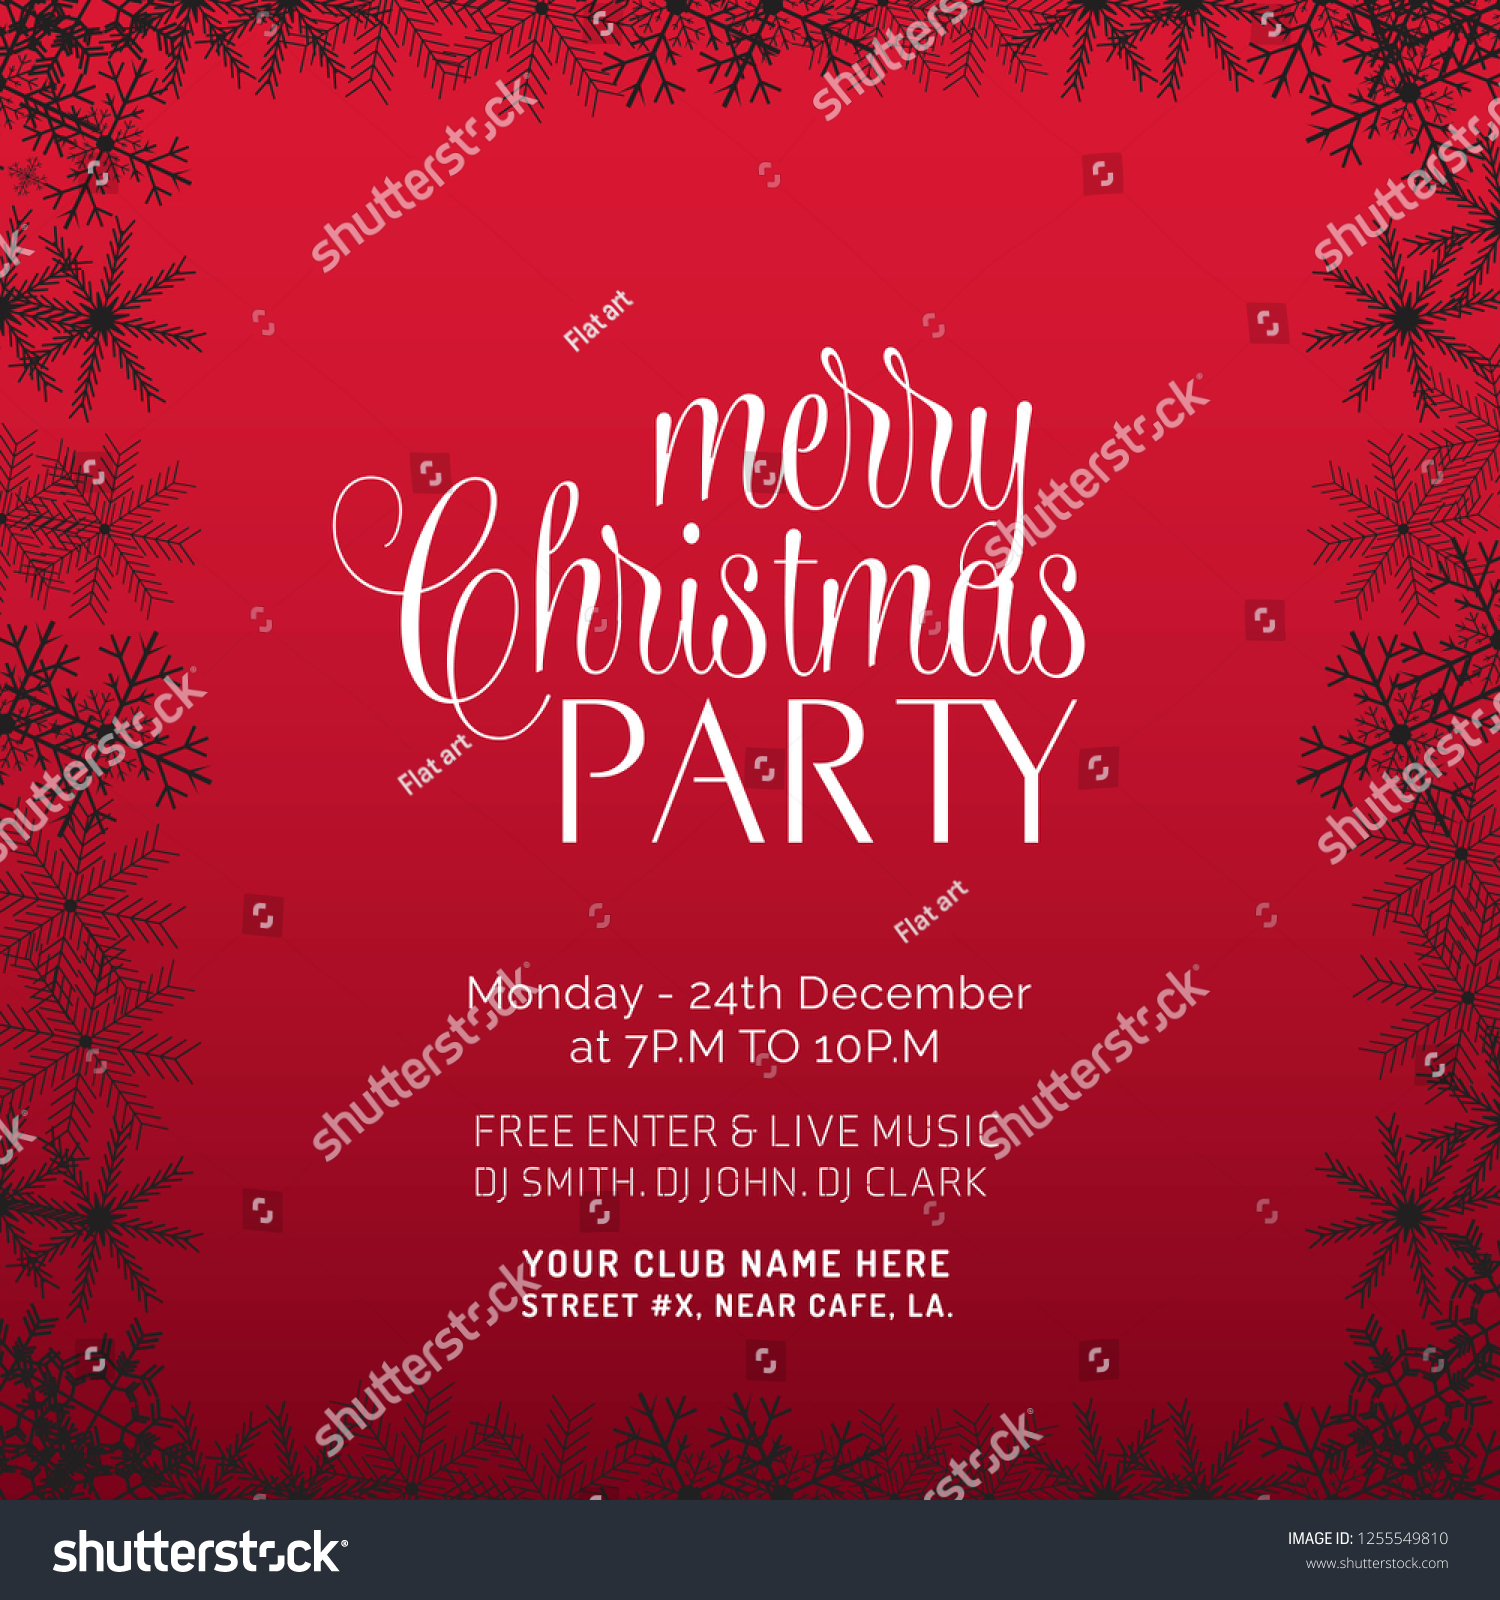 Merry Christmas Party Invitation Background Stock Vector (Royalty Free ...